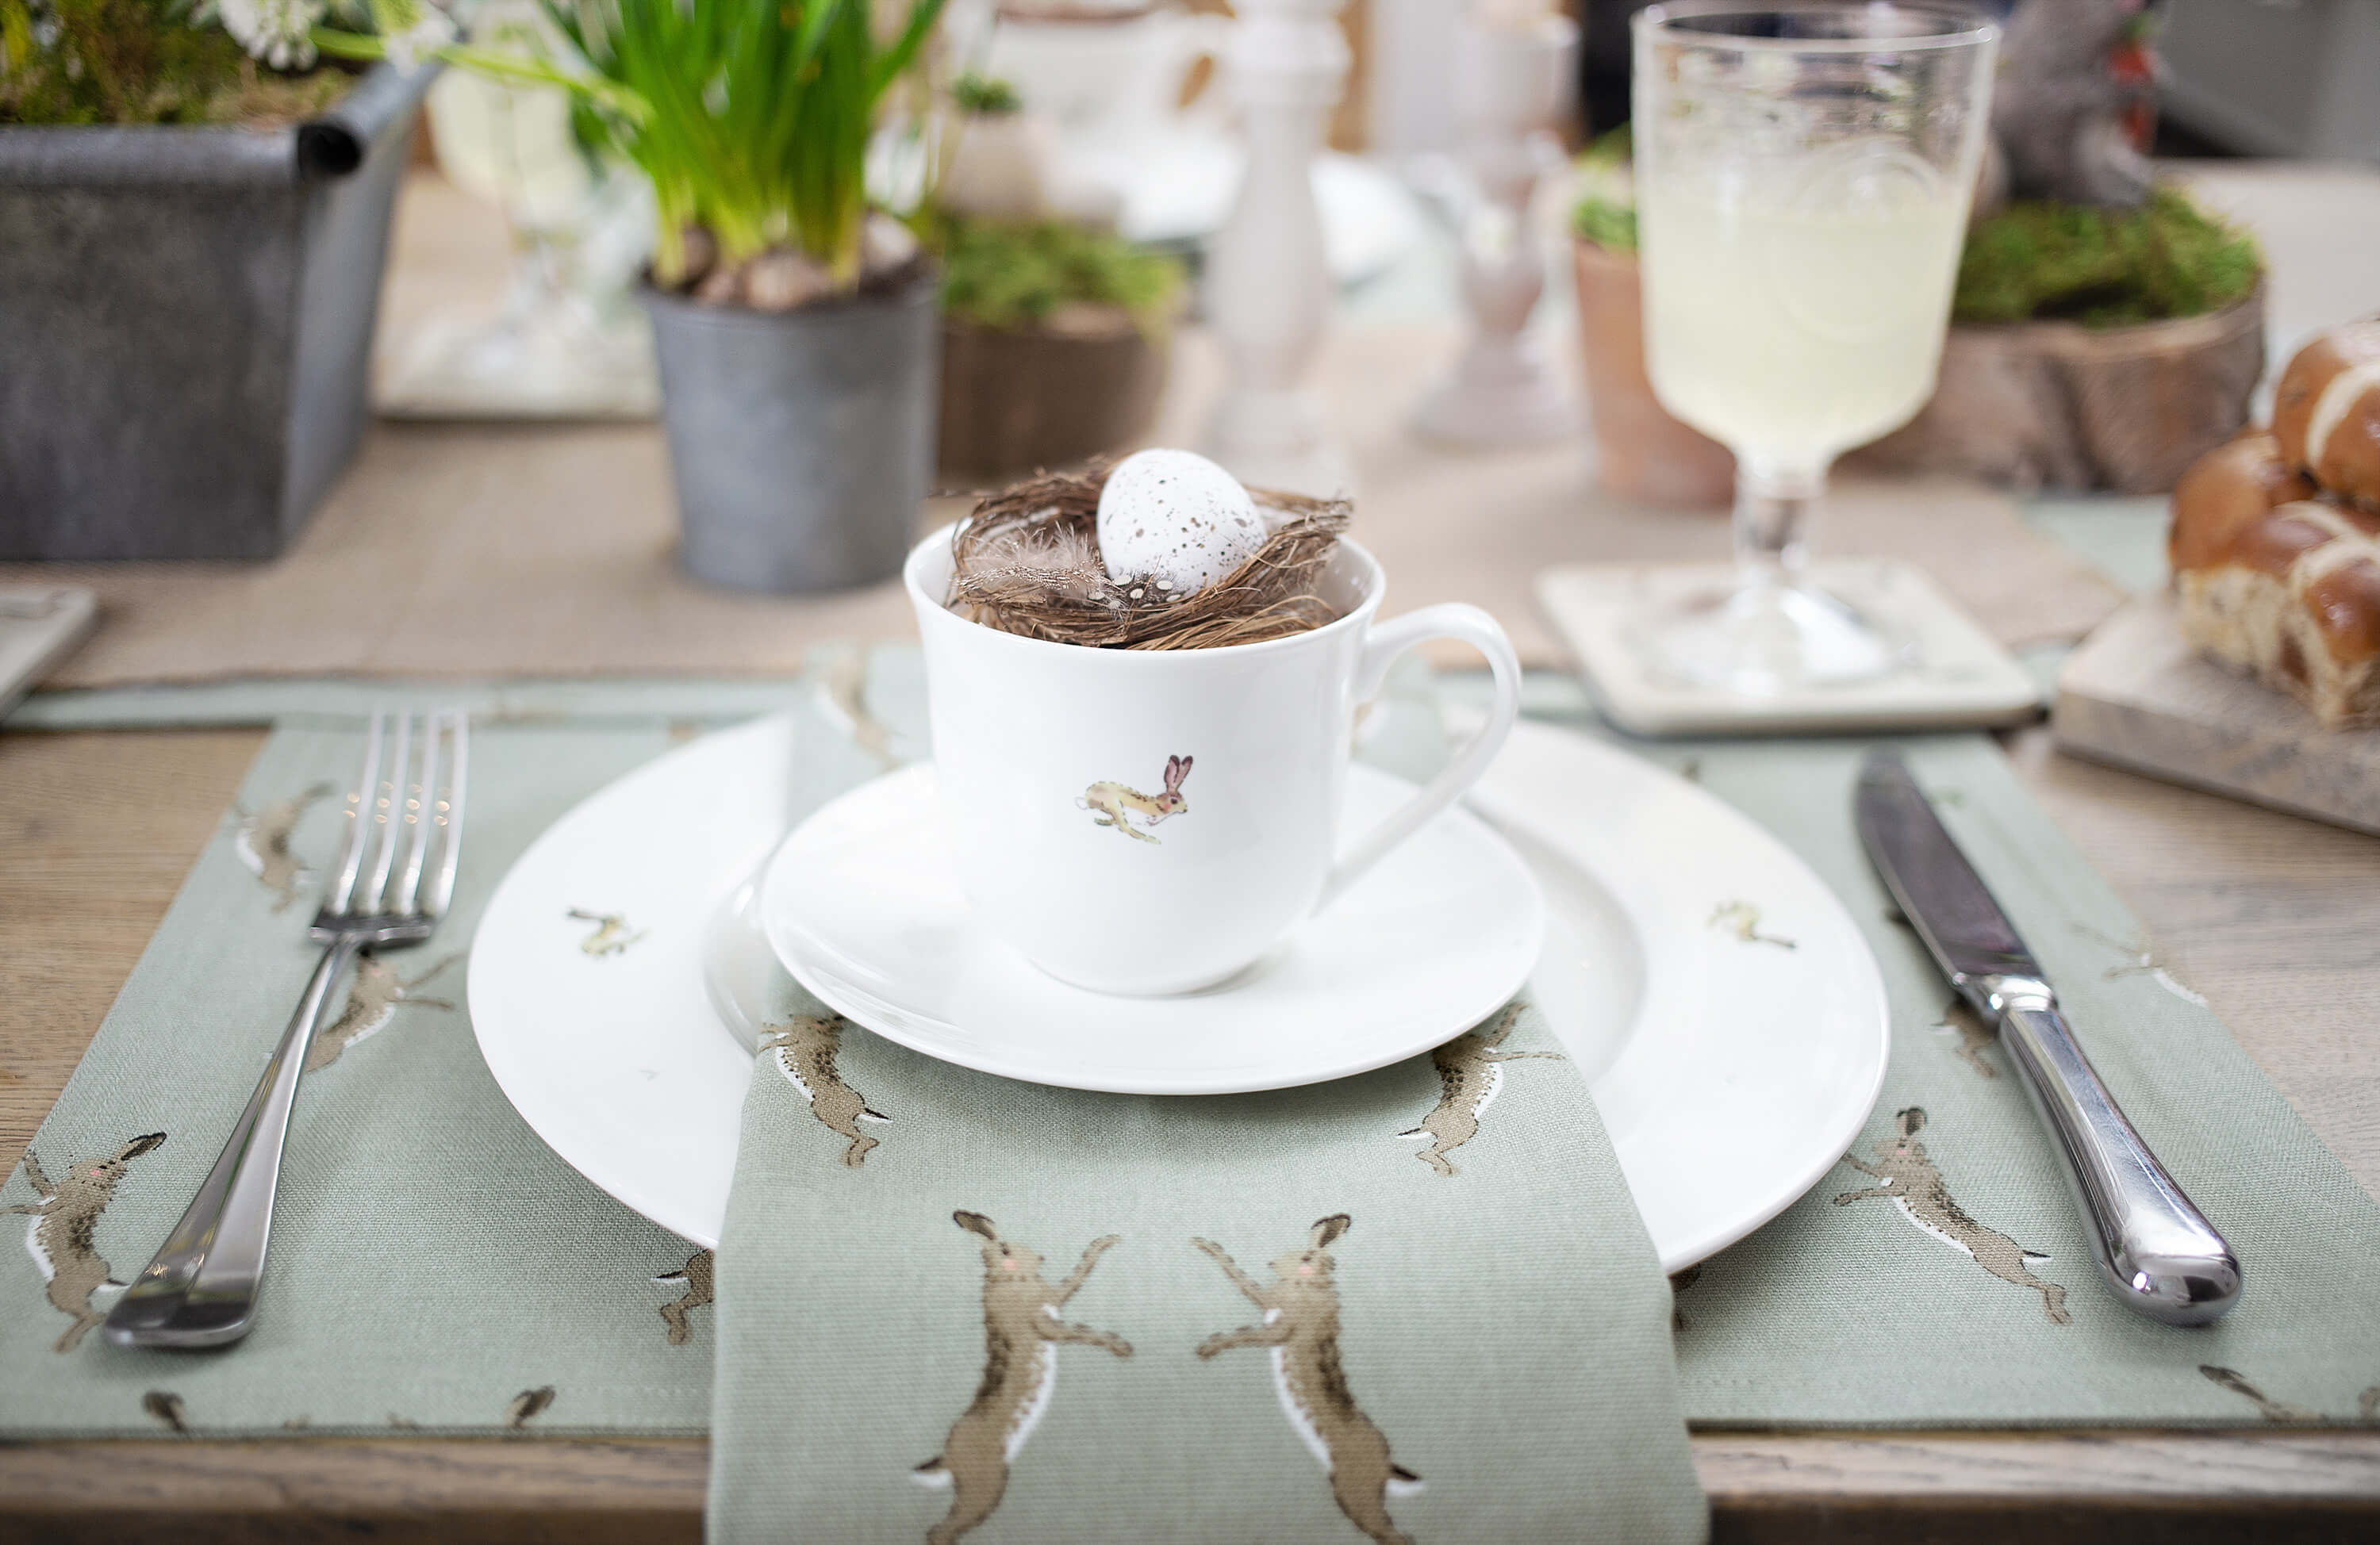 Spring Table Setting using Sophie Allport's Spring Designs 